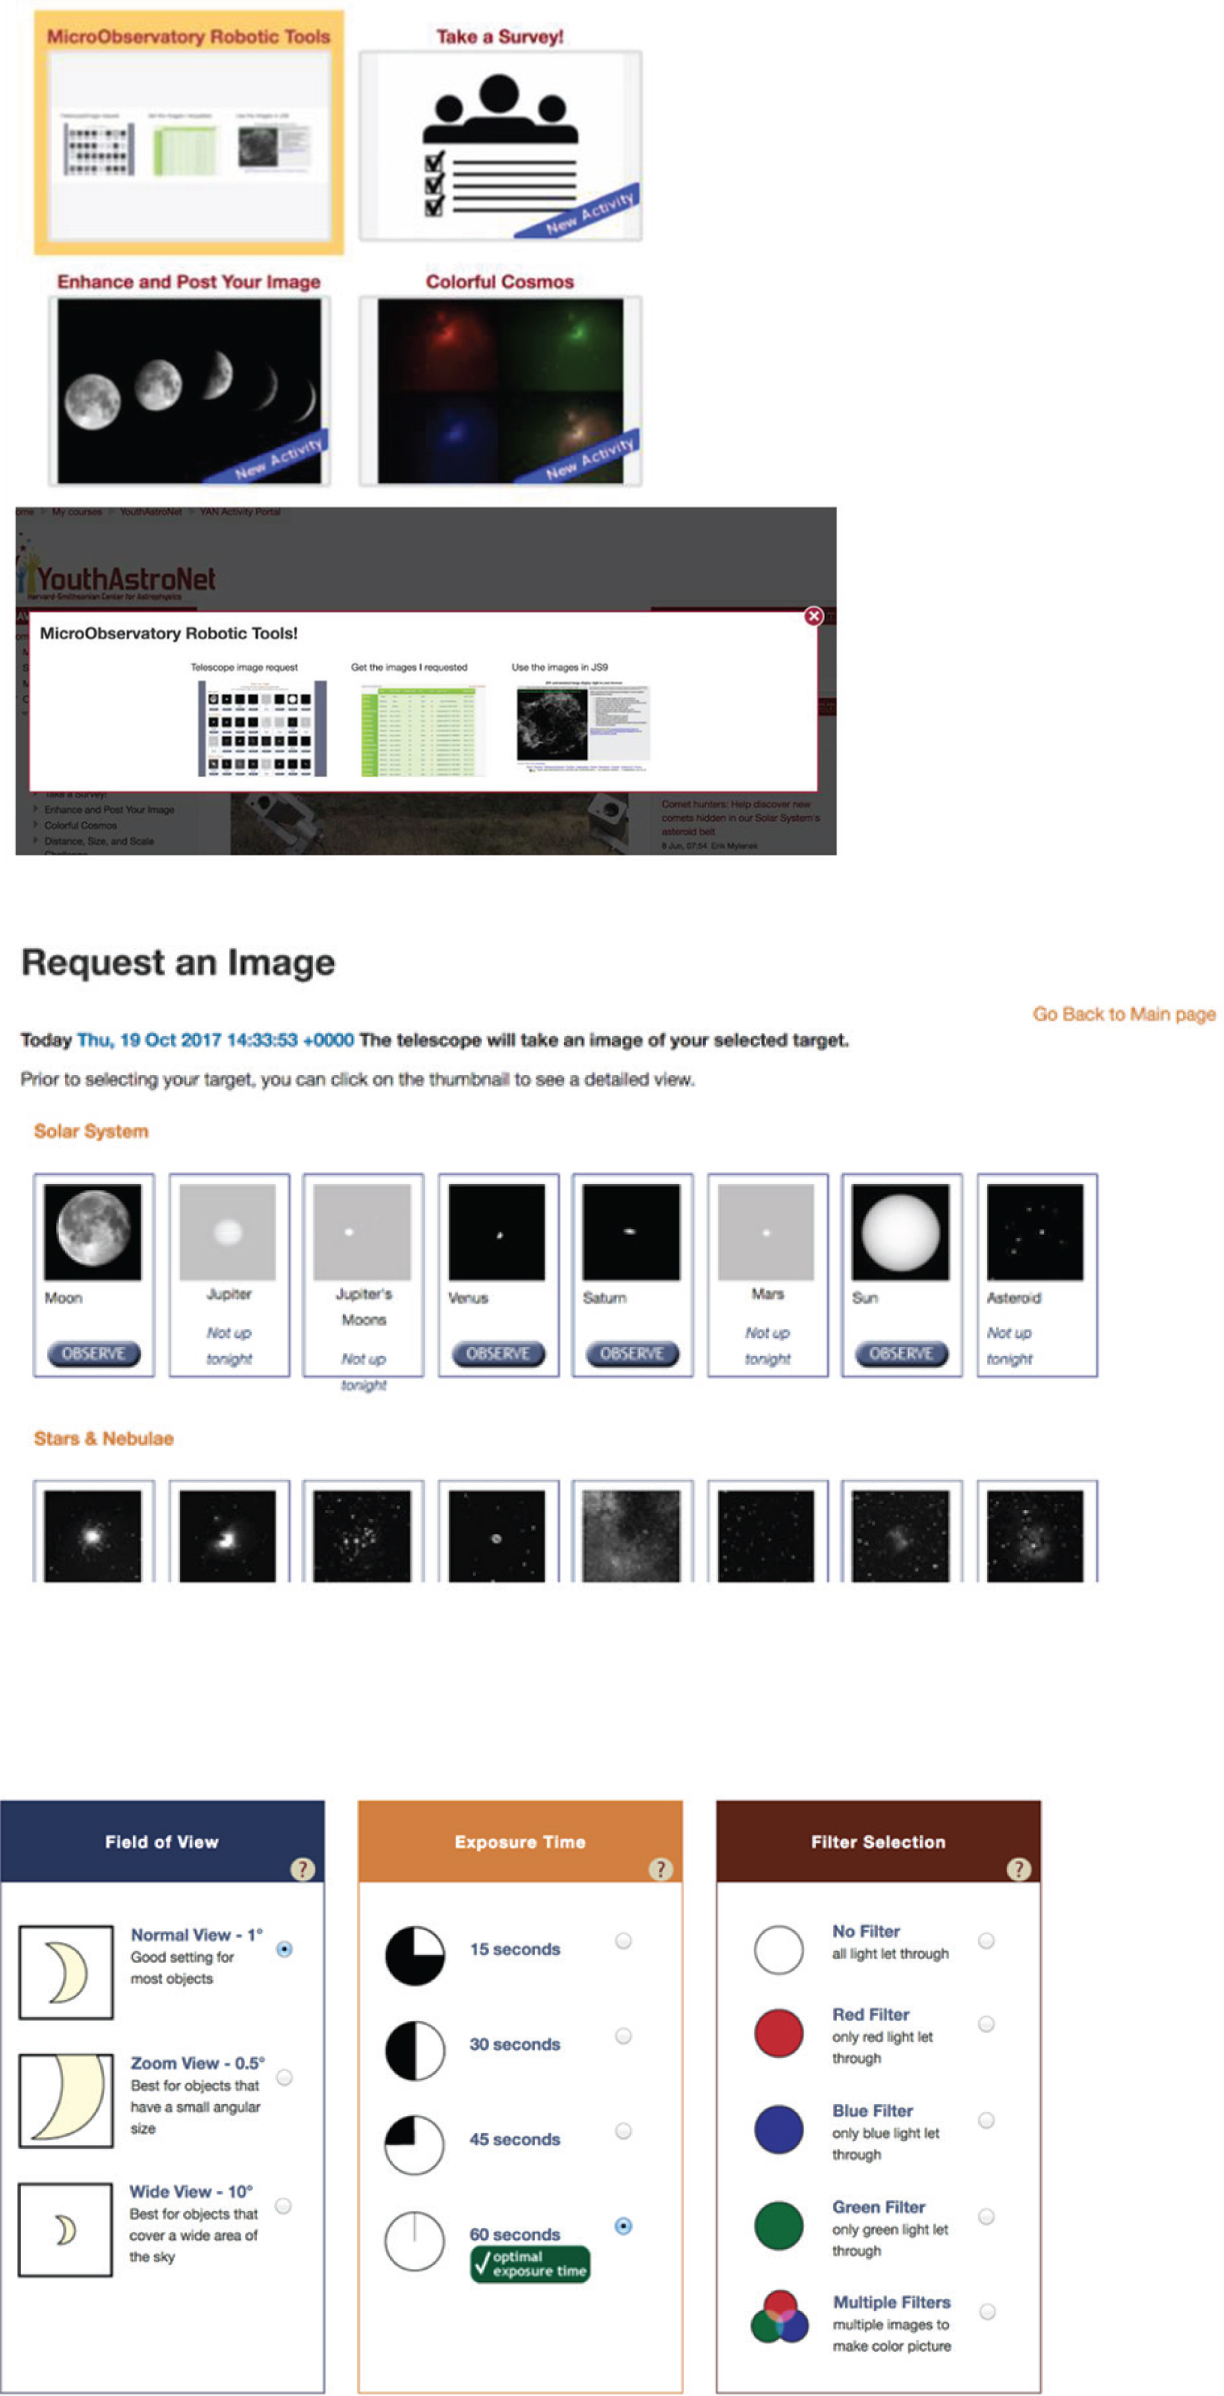 |	FIGURE 3: Overview of steps for accessing the MicroObservatory and requesting images.